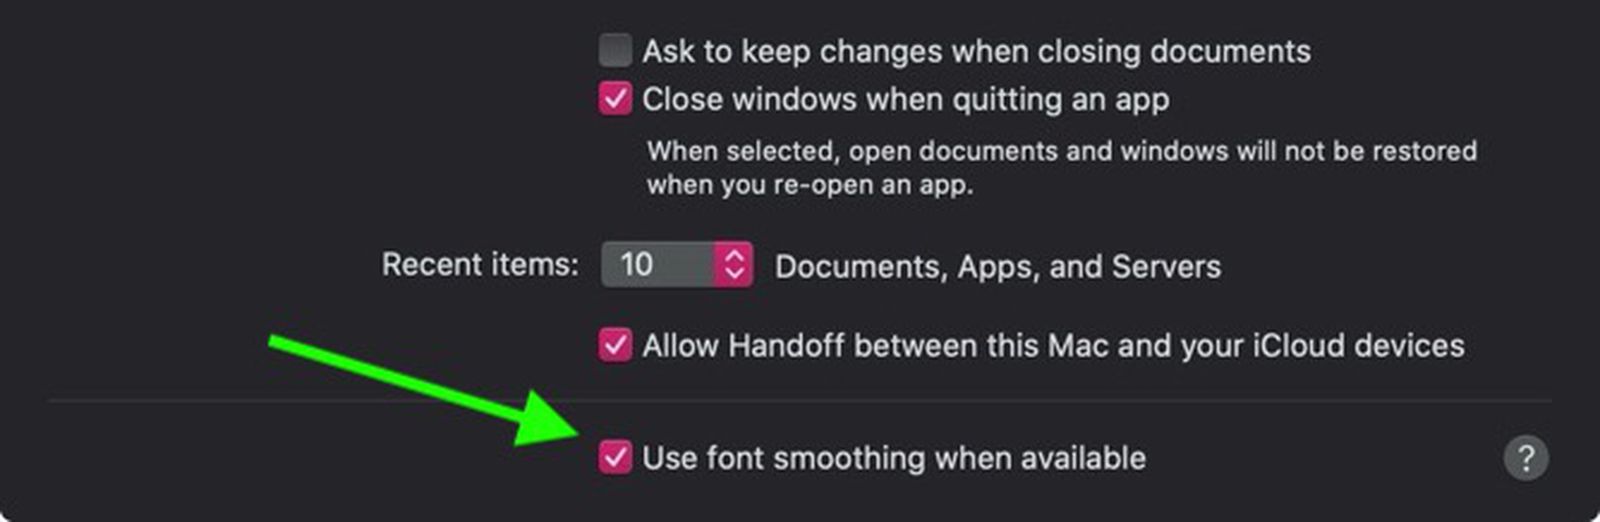 How To Adjust Or Disable Font Smoothing In Macos Big Sur Macrumors